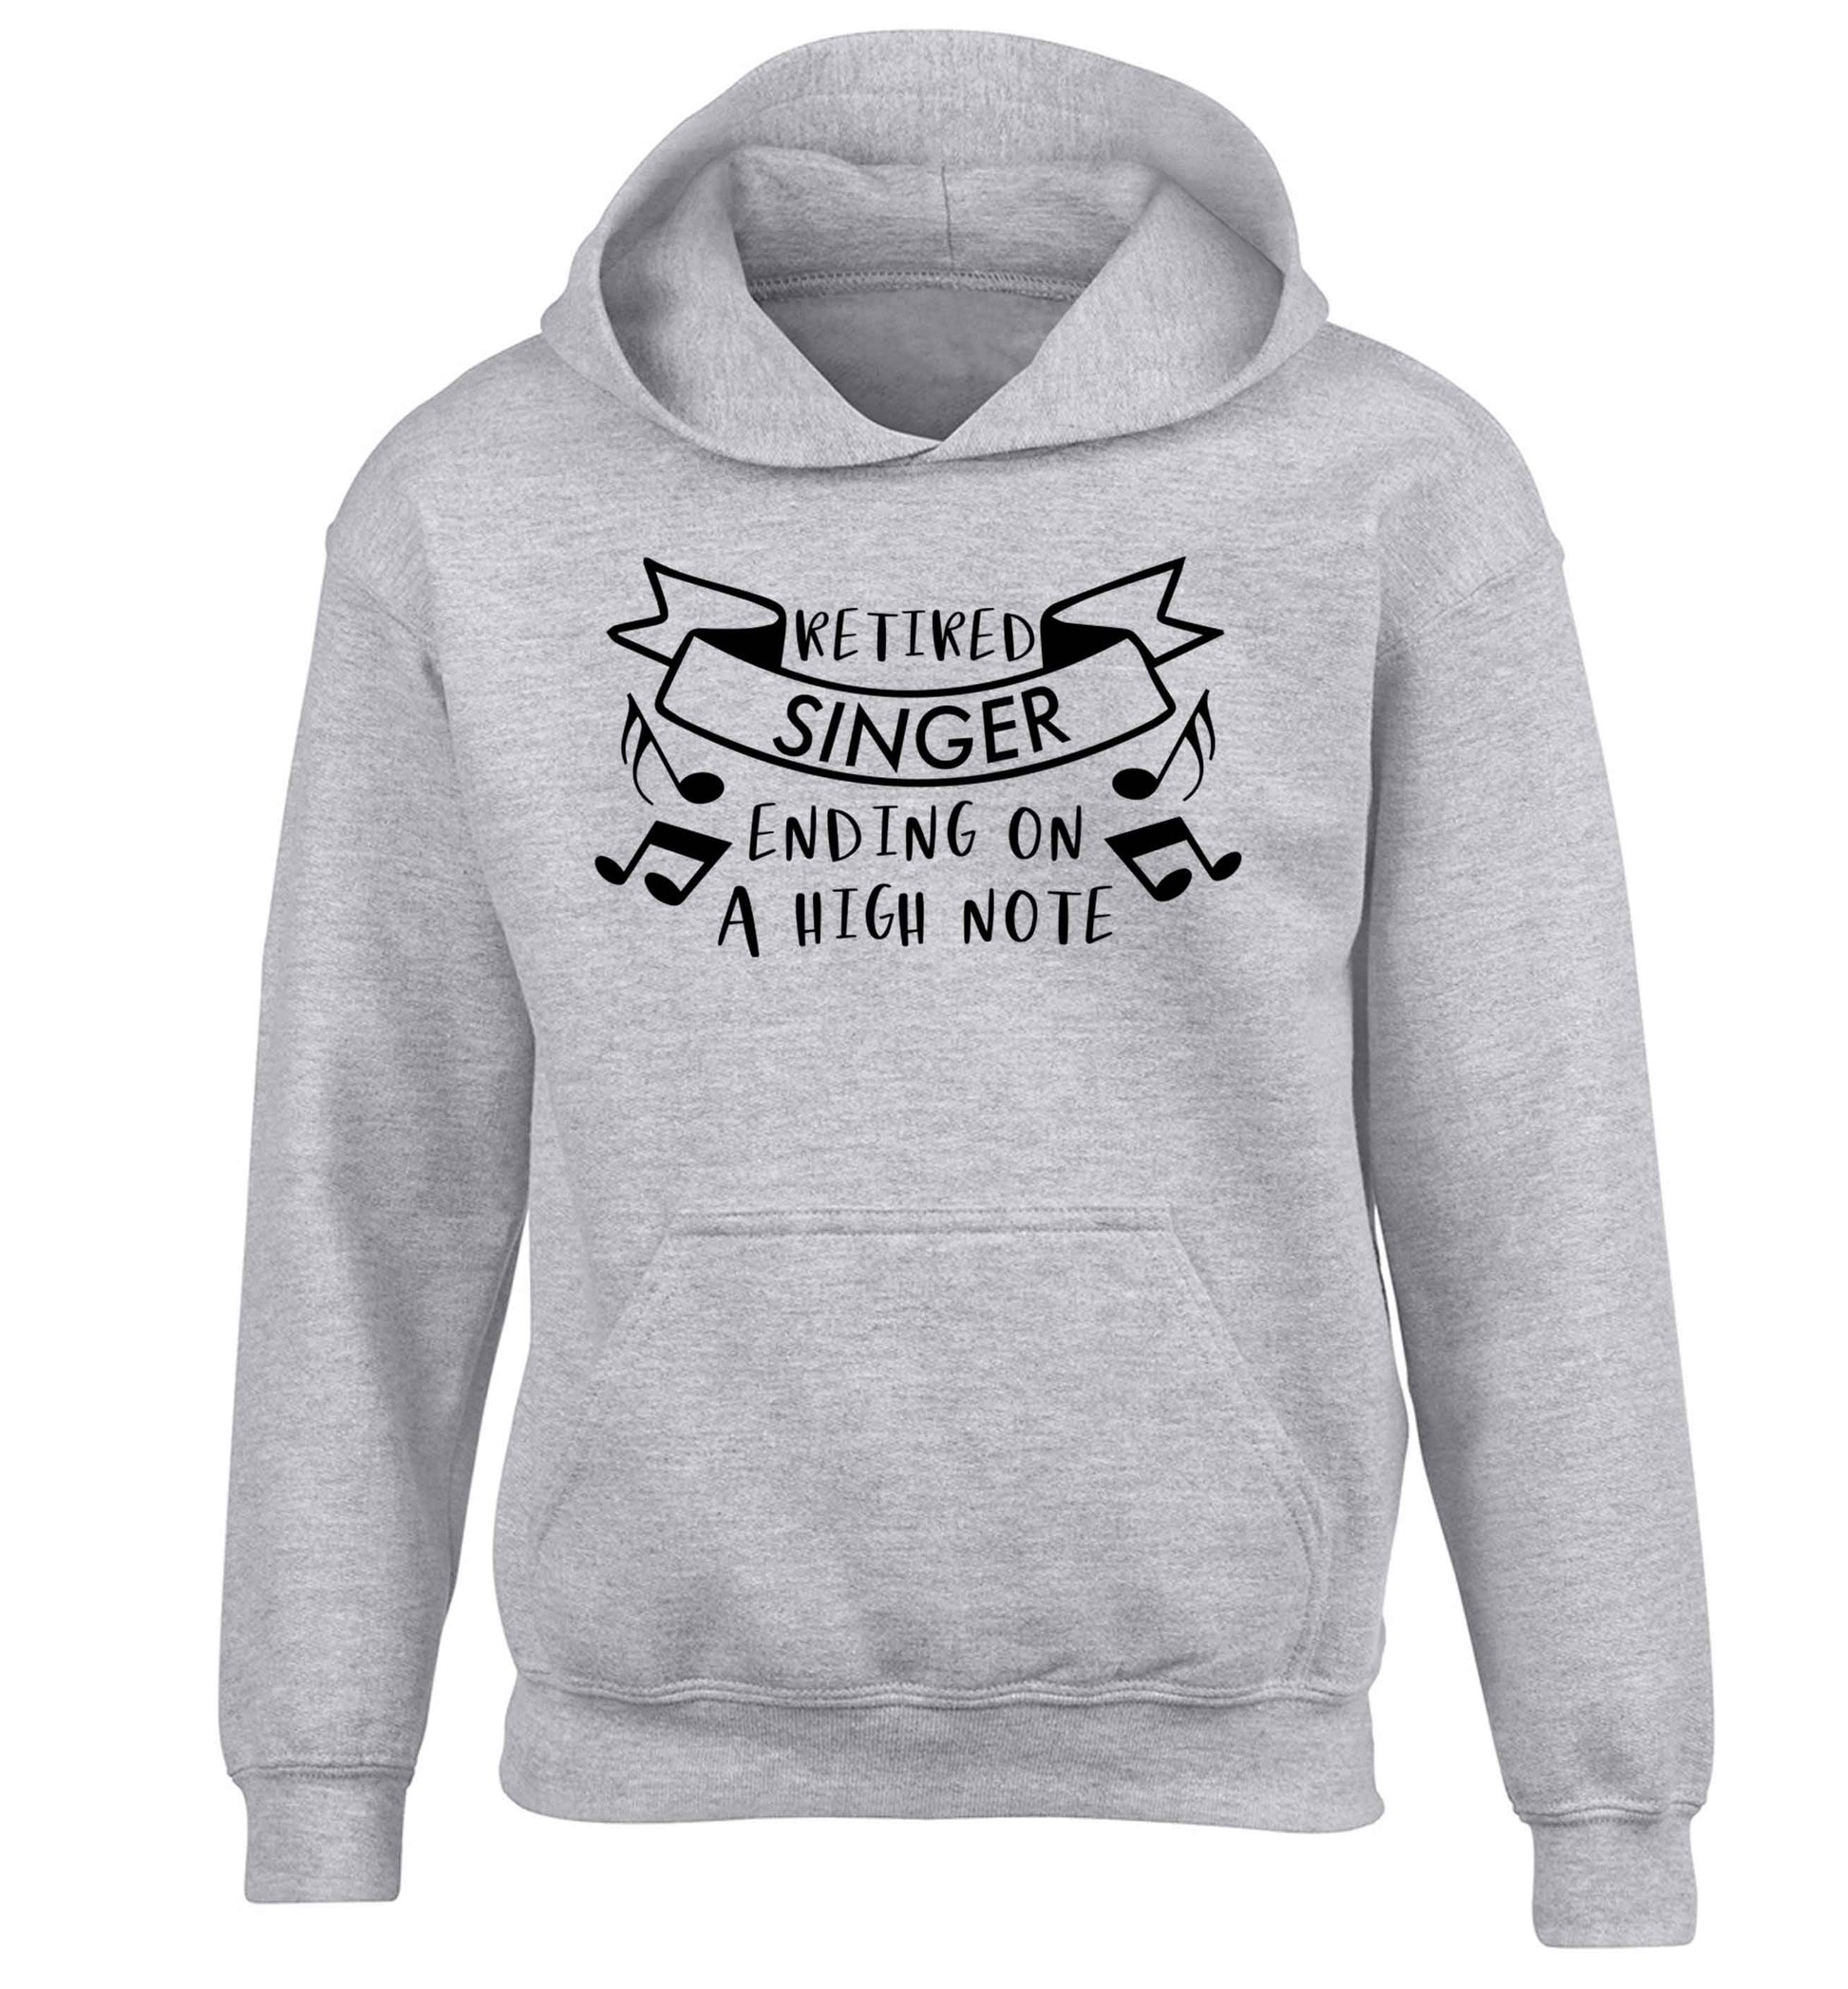 Retired singer ending on a high note children's grey hoodie 12-13 Years